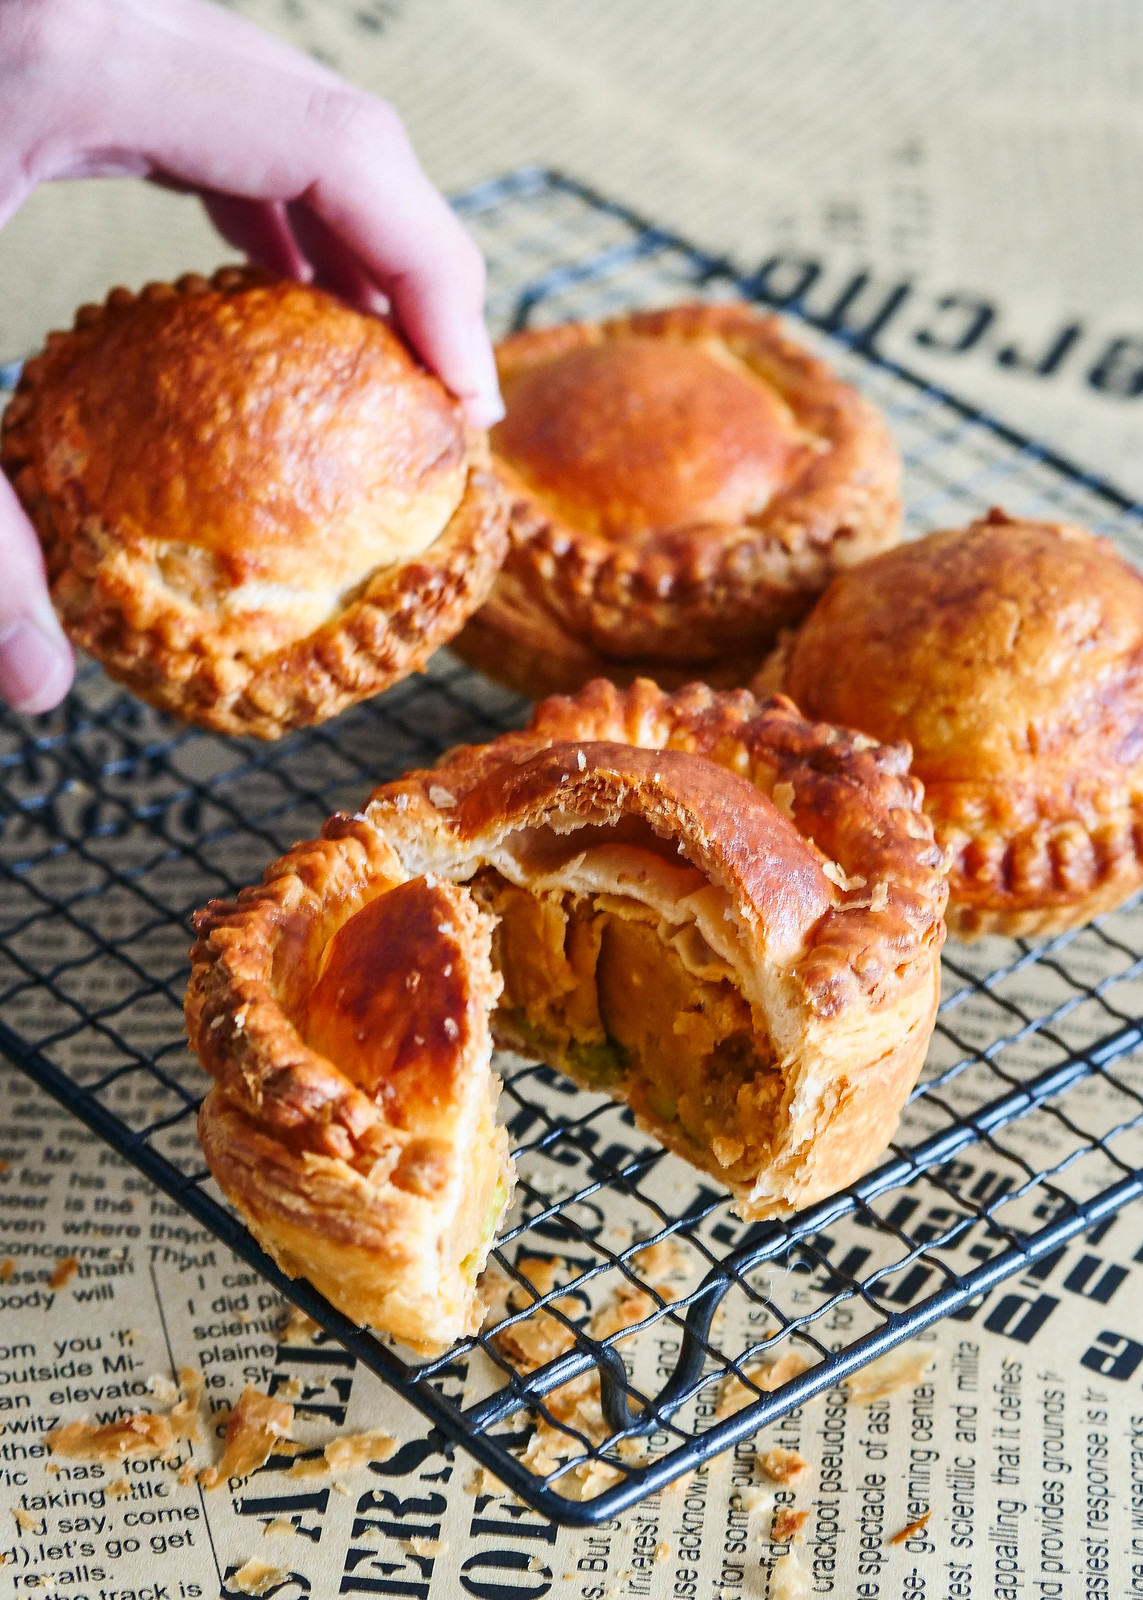 Best Pies In Singapore Our Blind Taste Test Revealed Who S The